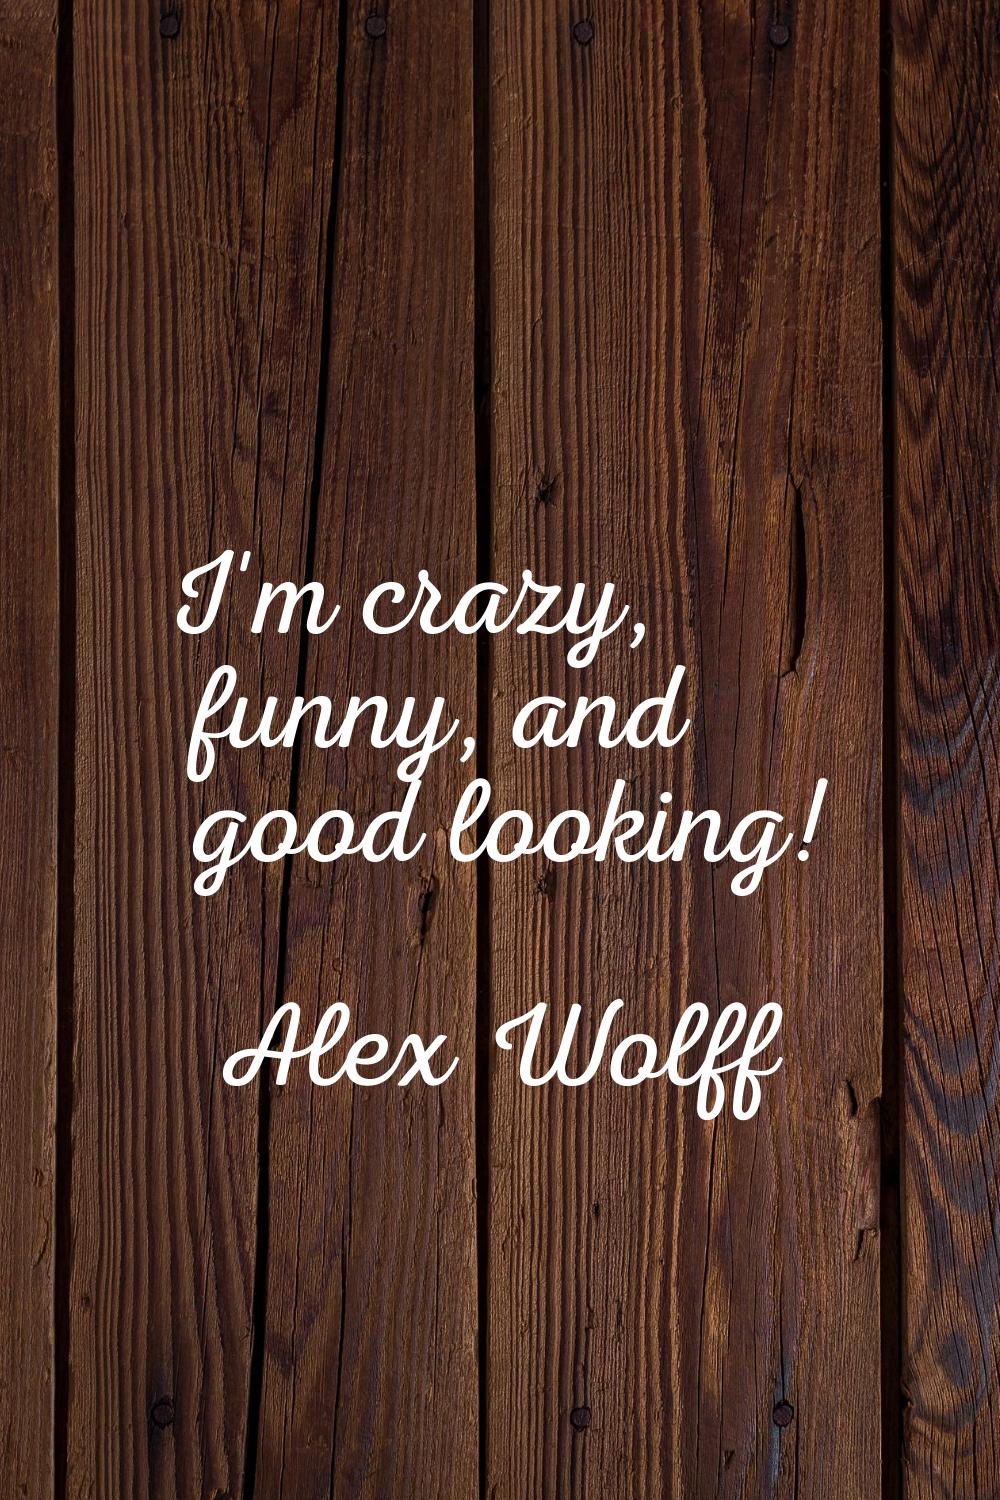 I'm crazy, funny, and good looking!